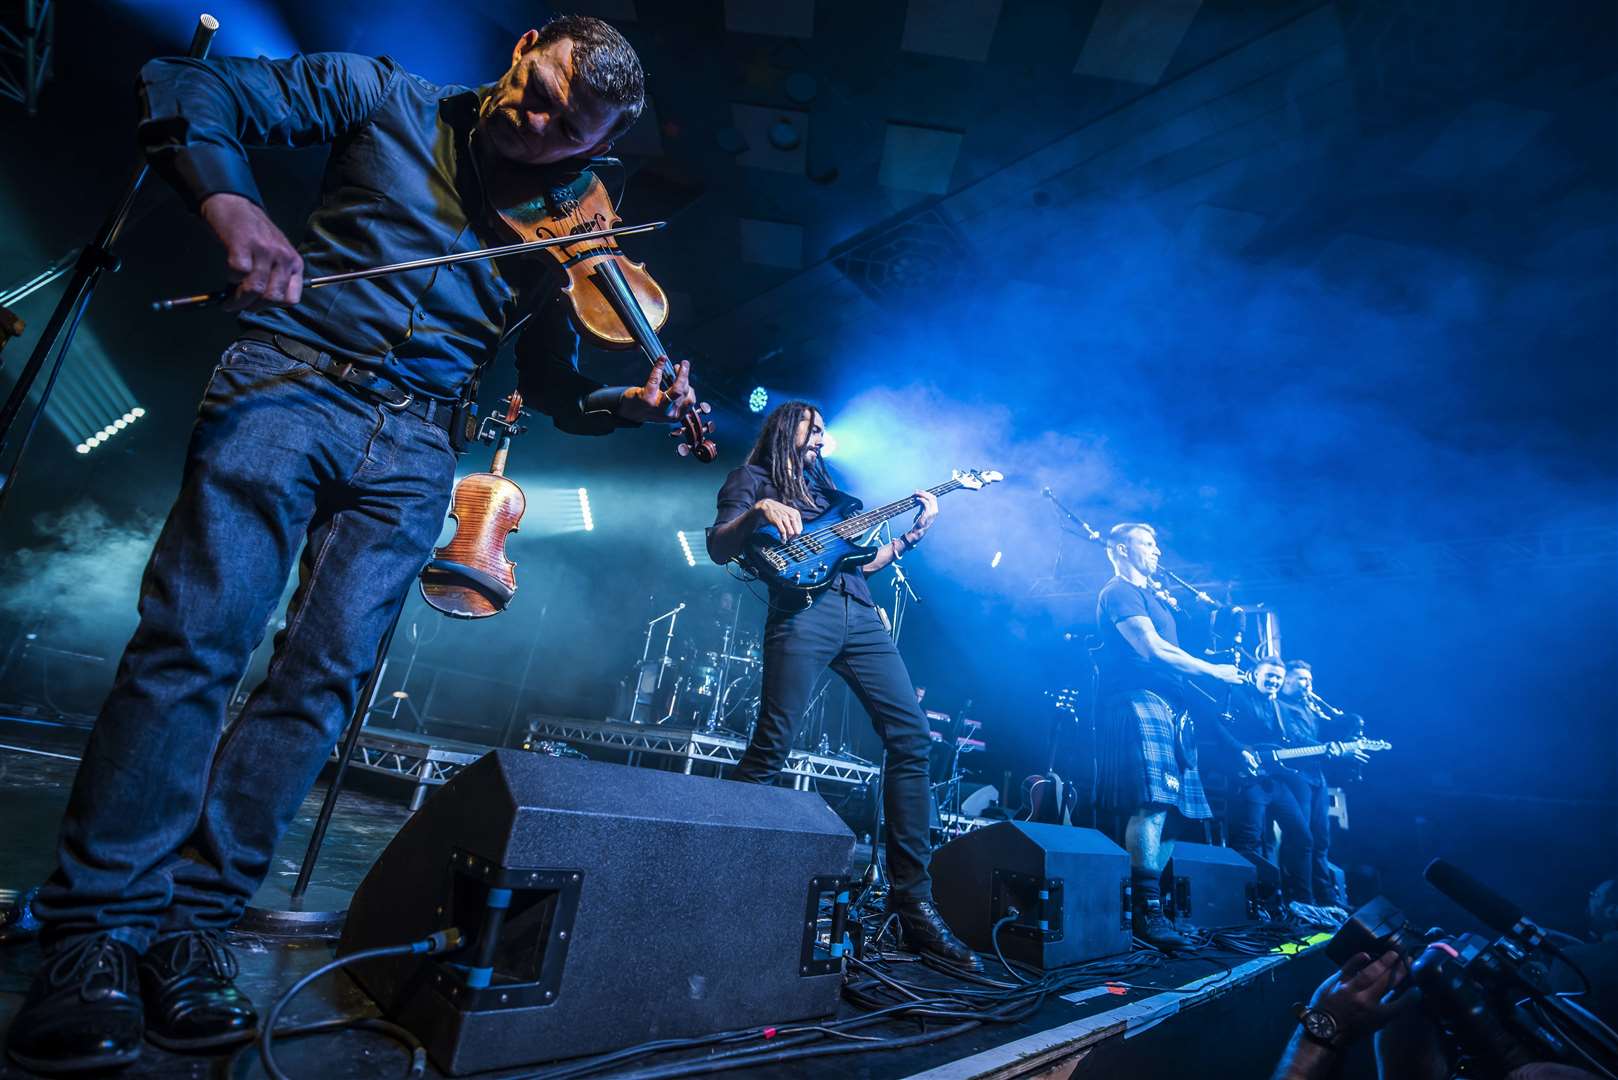 Bands like Skerryvore have a huge following. Picture: Chris Payne